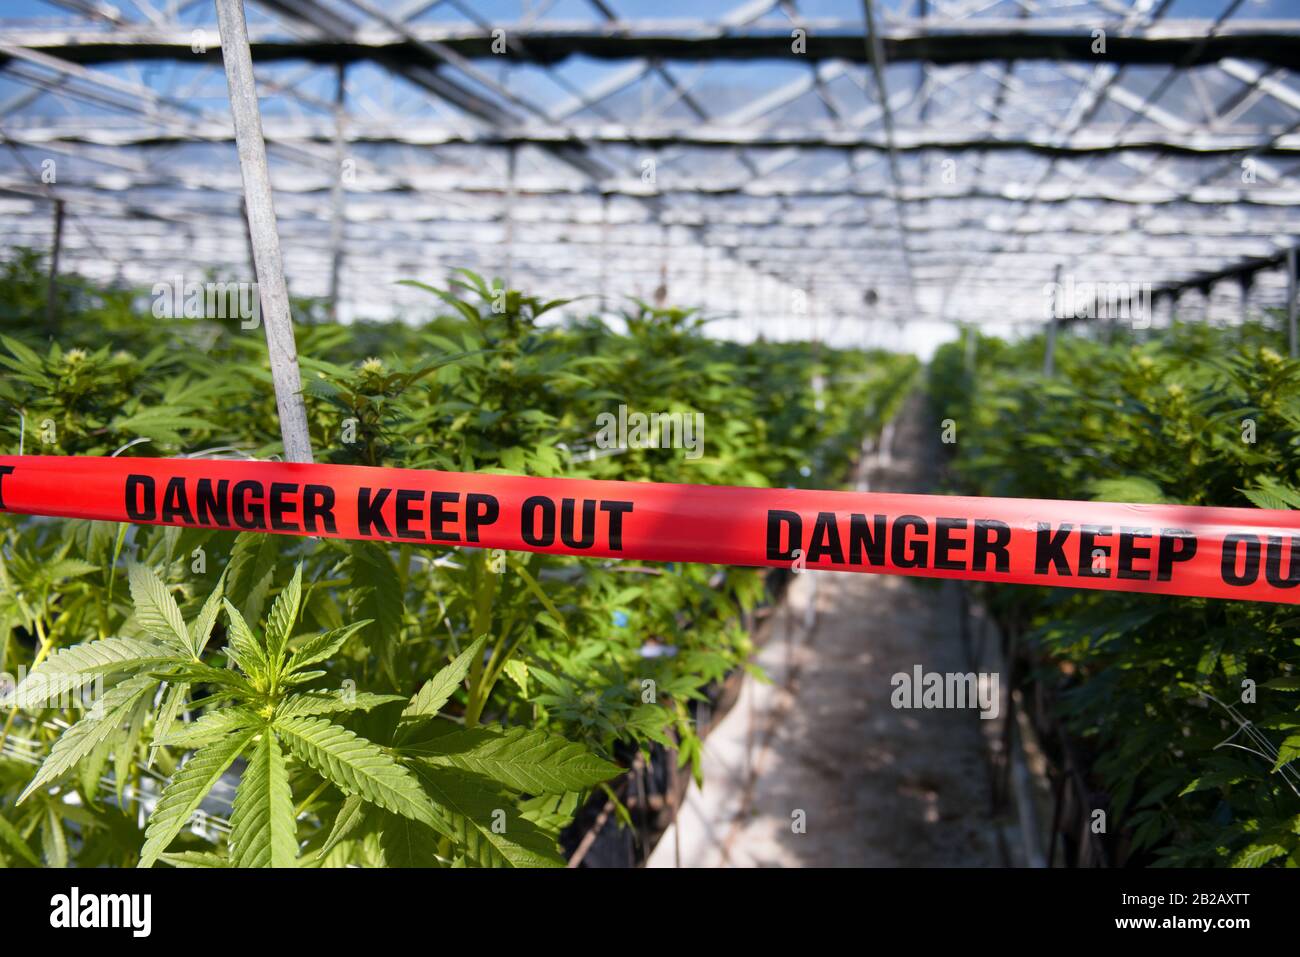 Danger Keep Out tape across a greenhouse full of cannabis plants, USA Stock Photo